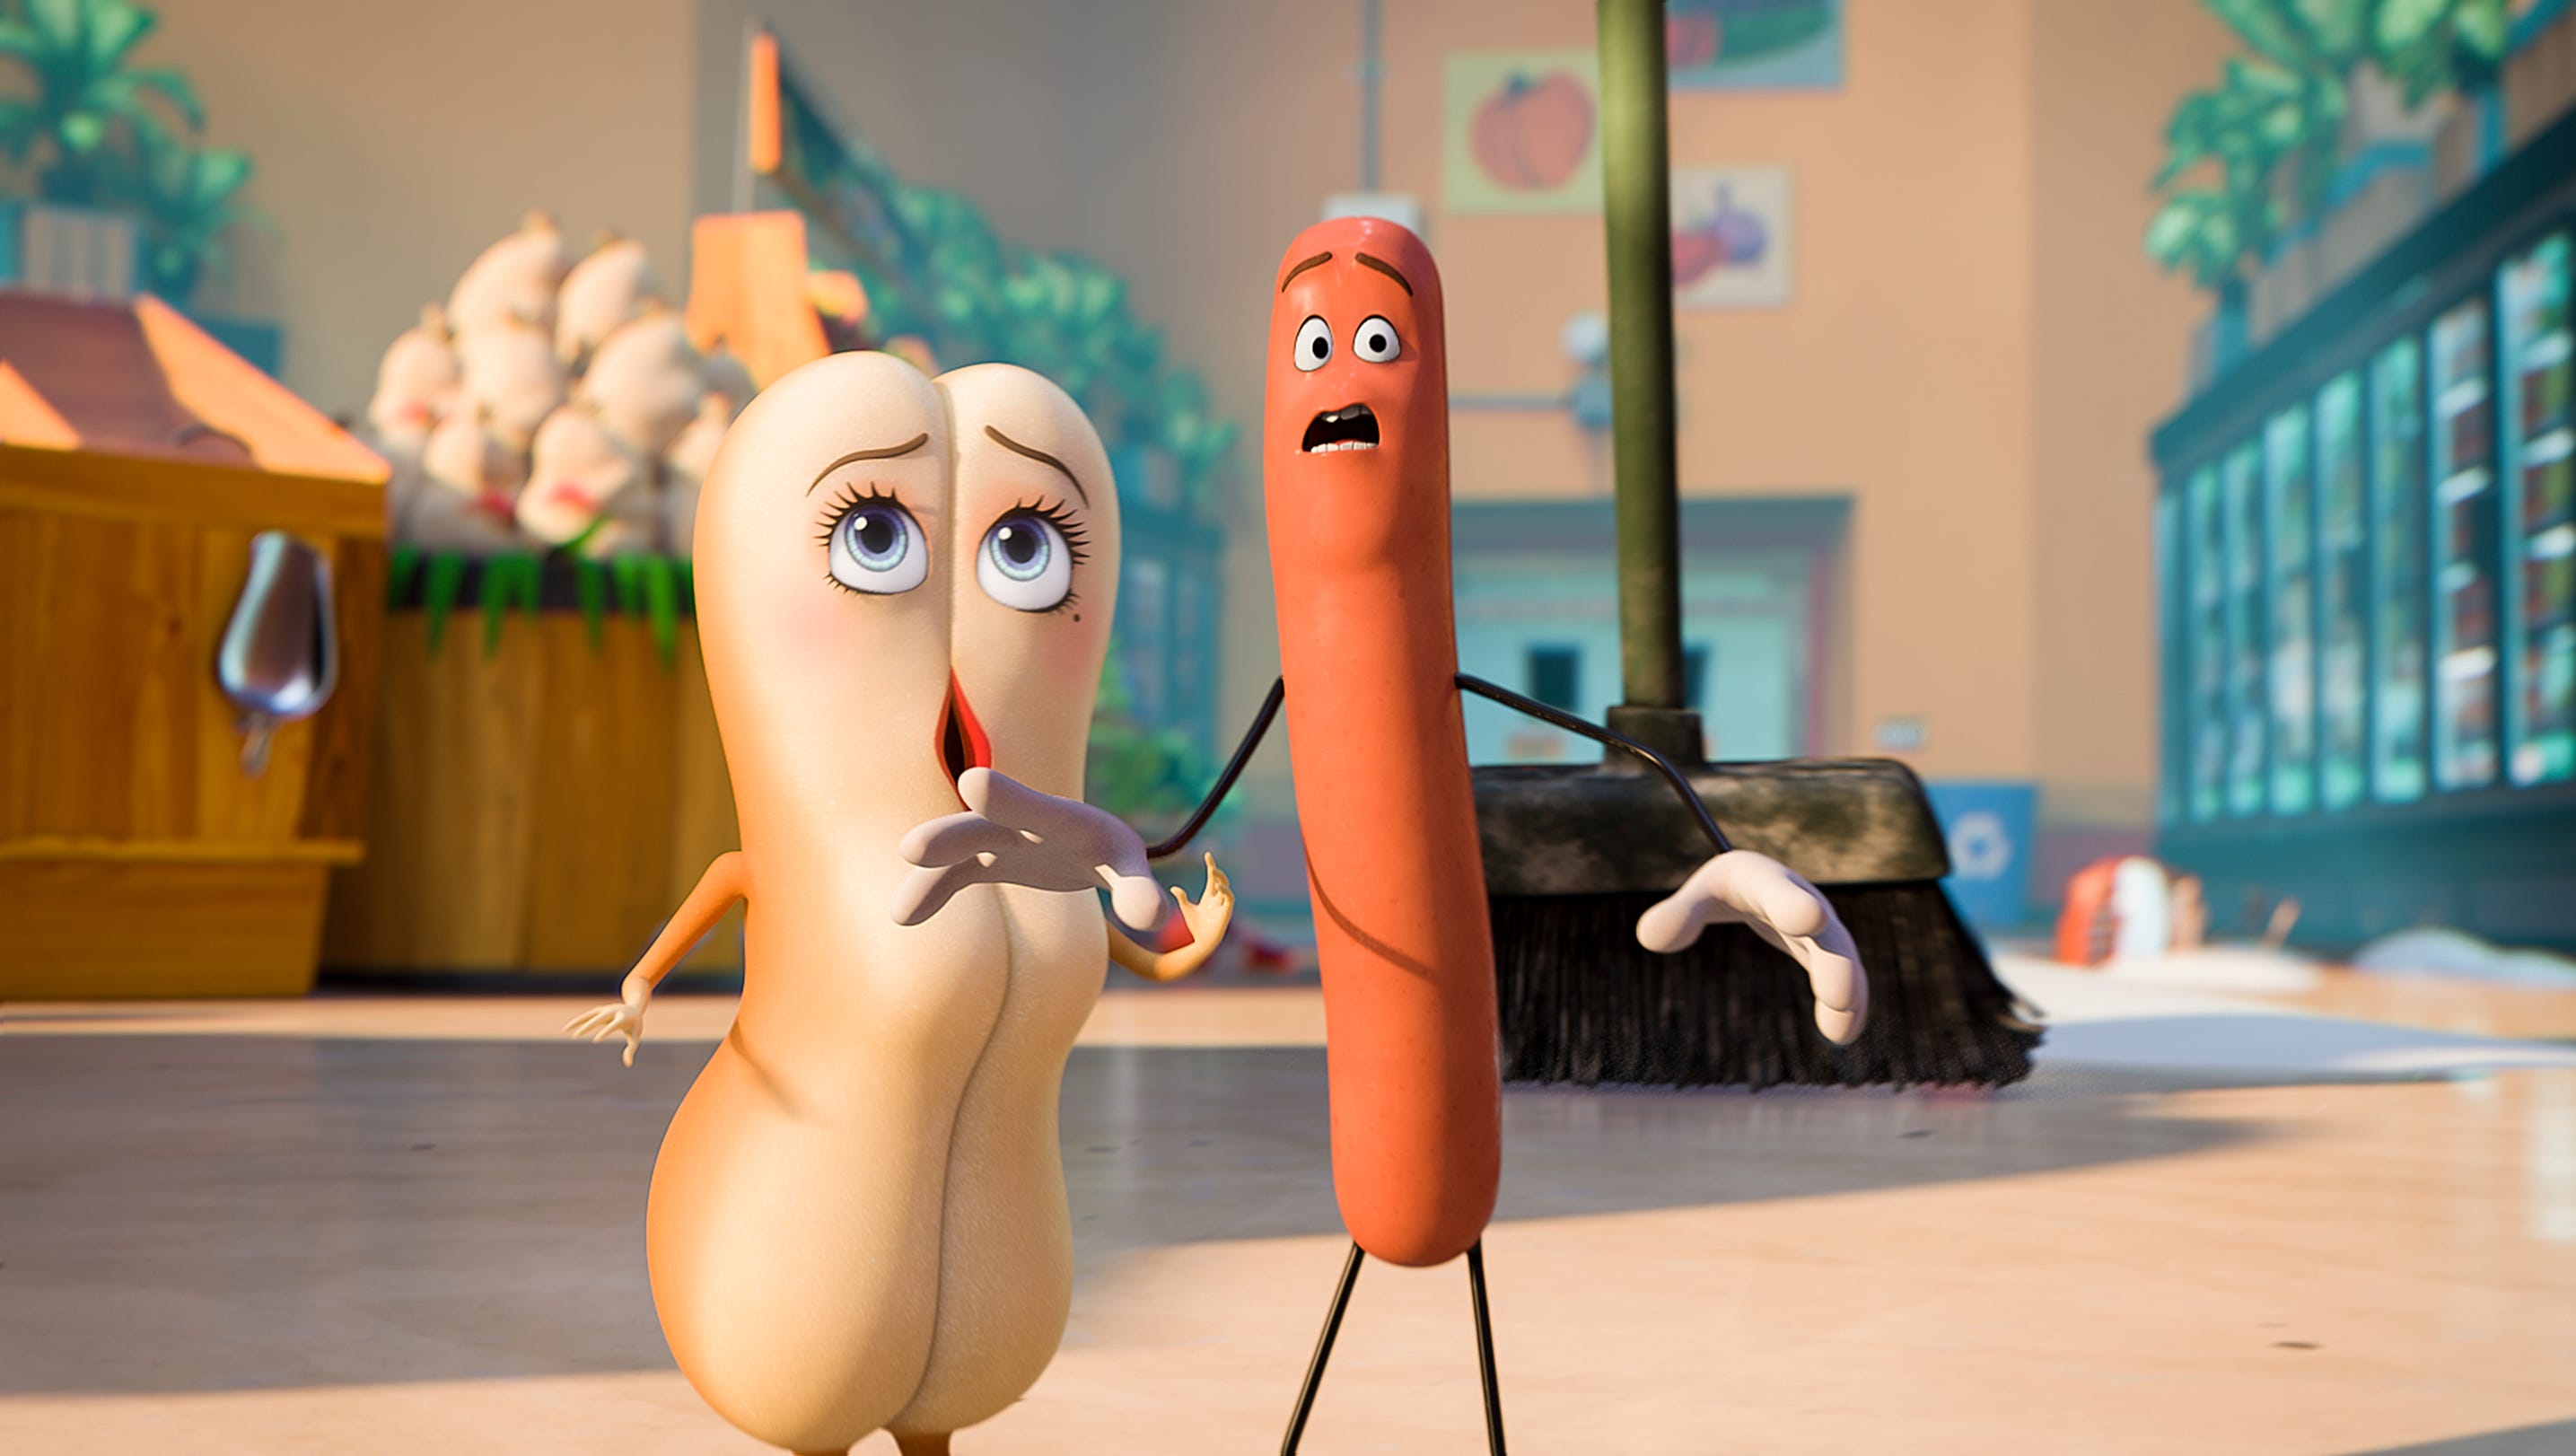 Lesbian With Hot Dogs - Review: Crude food comes to life in smart 'Sausage Party'